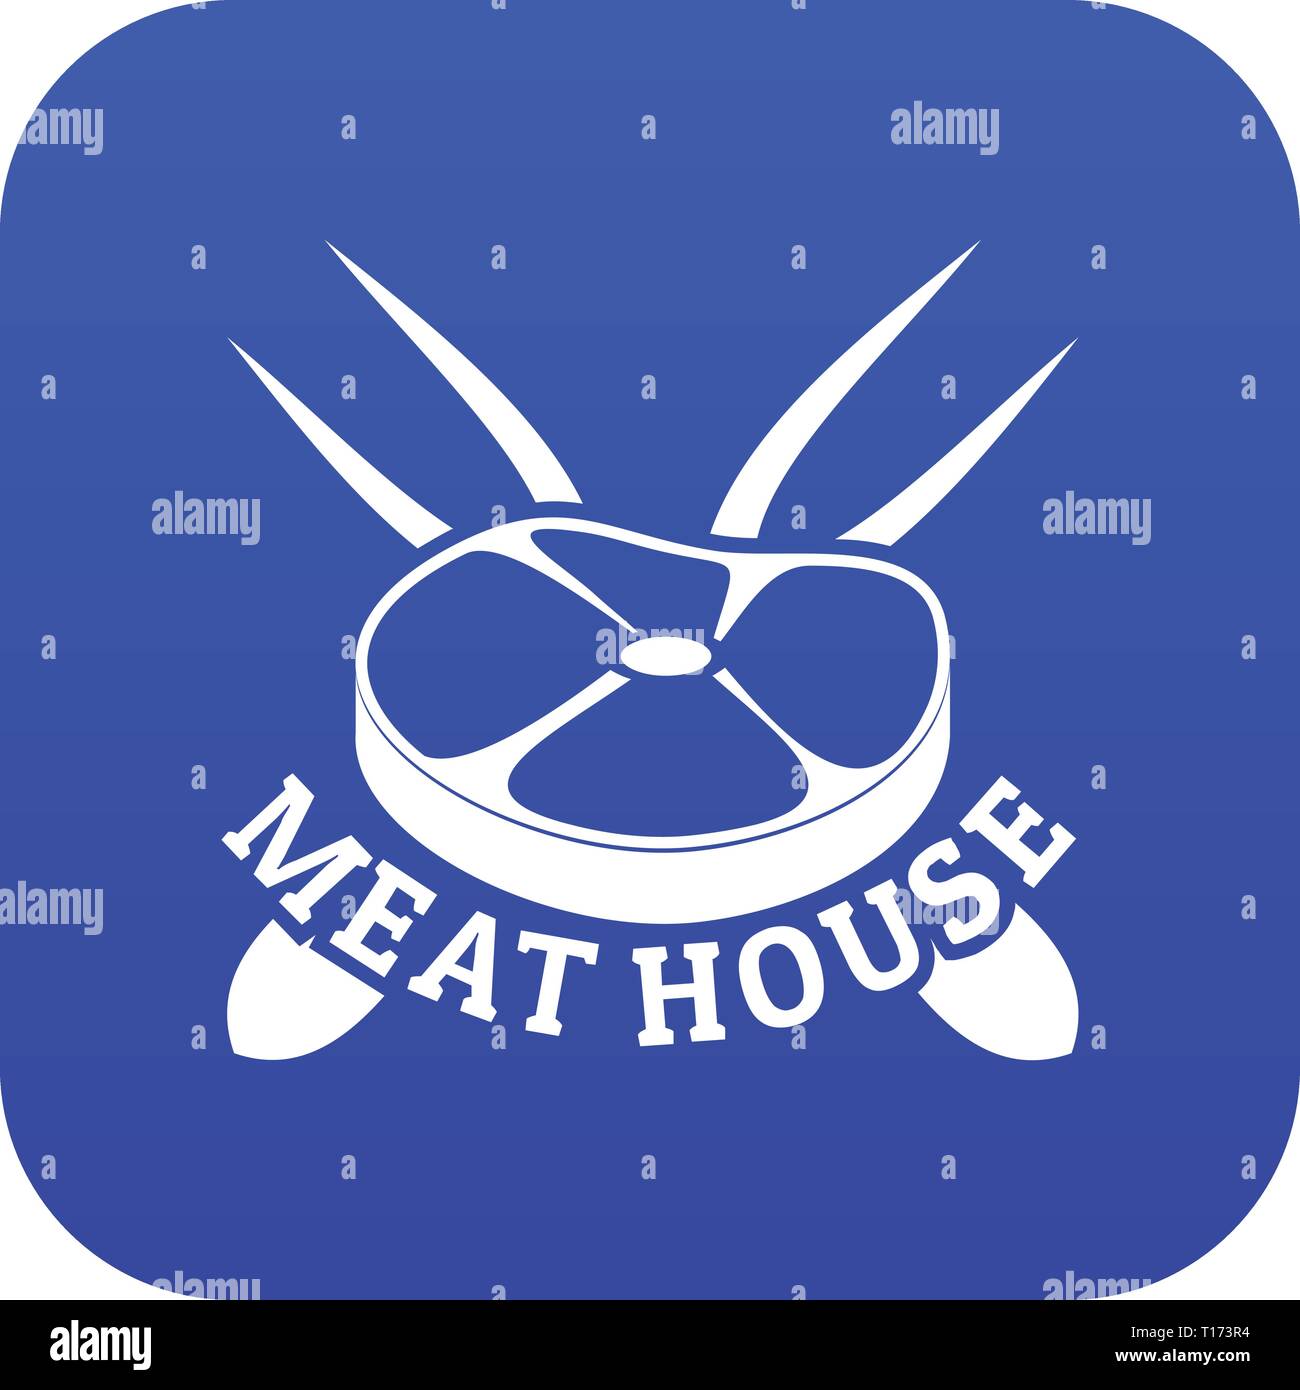 Meat house icon blue vector Stock Vector